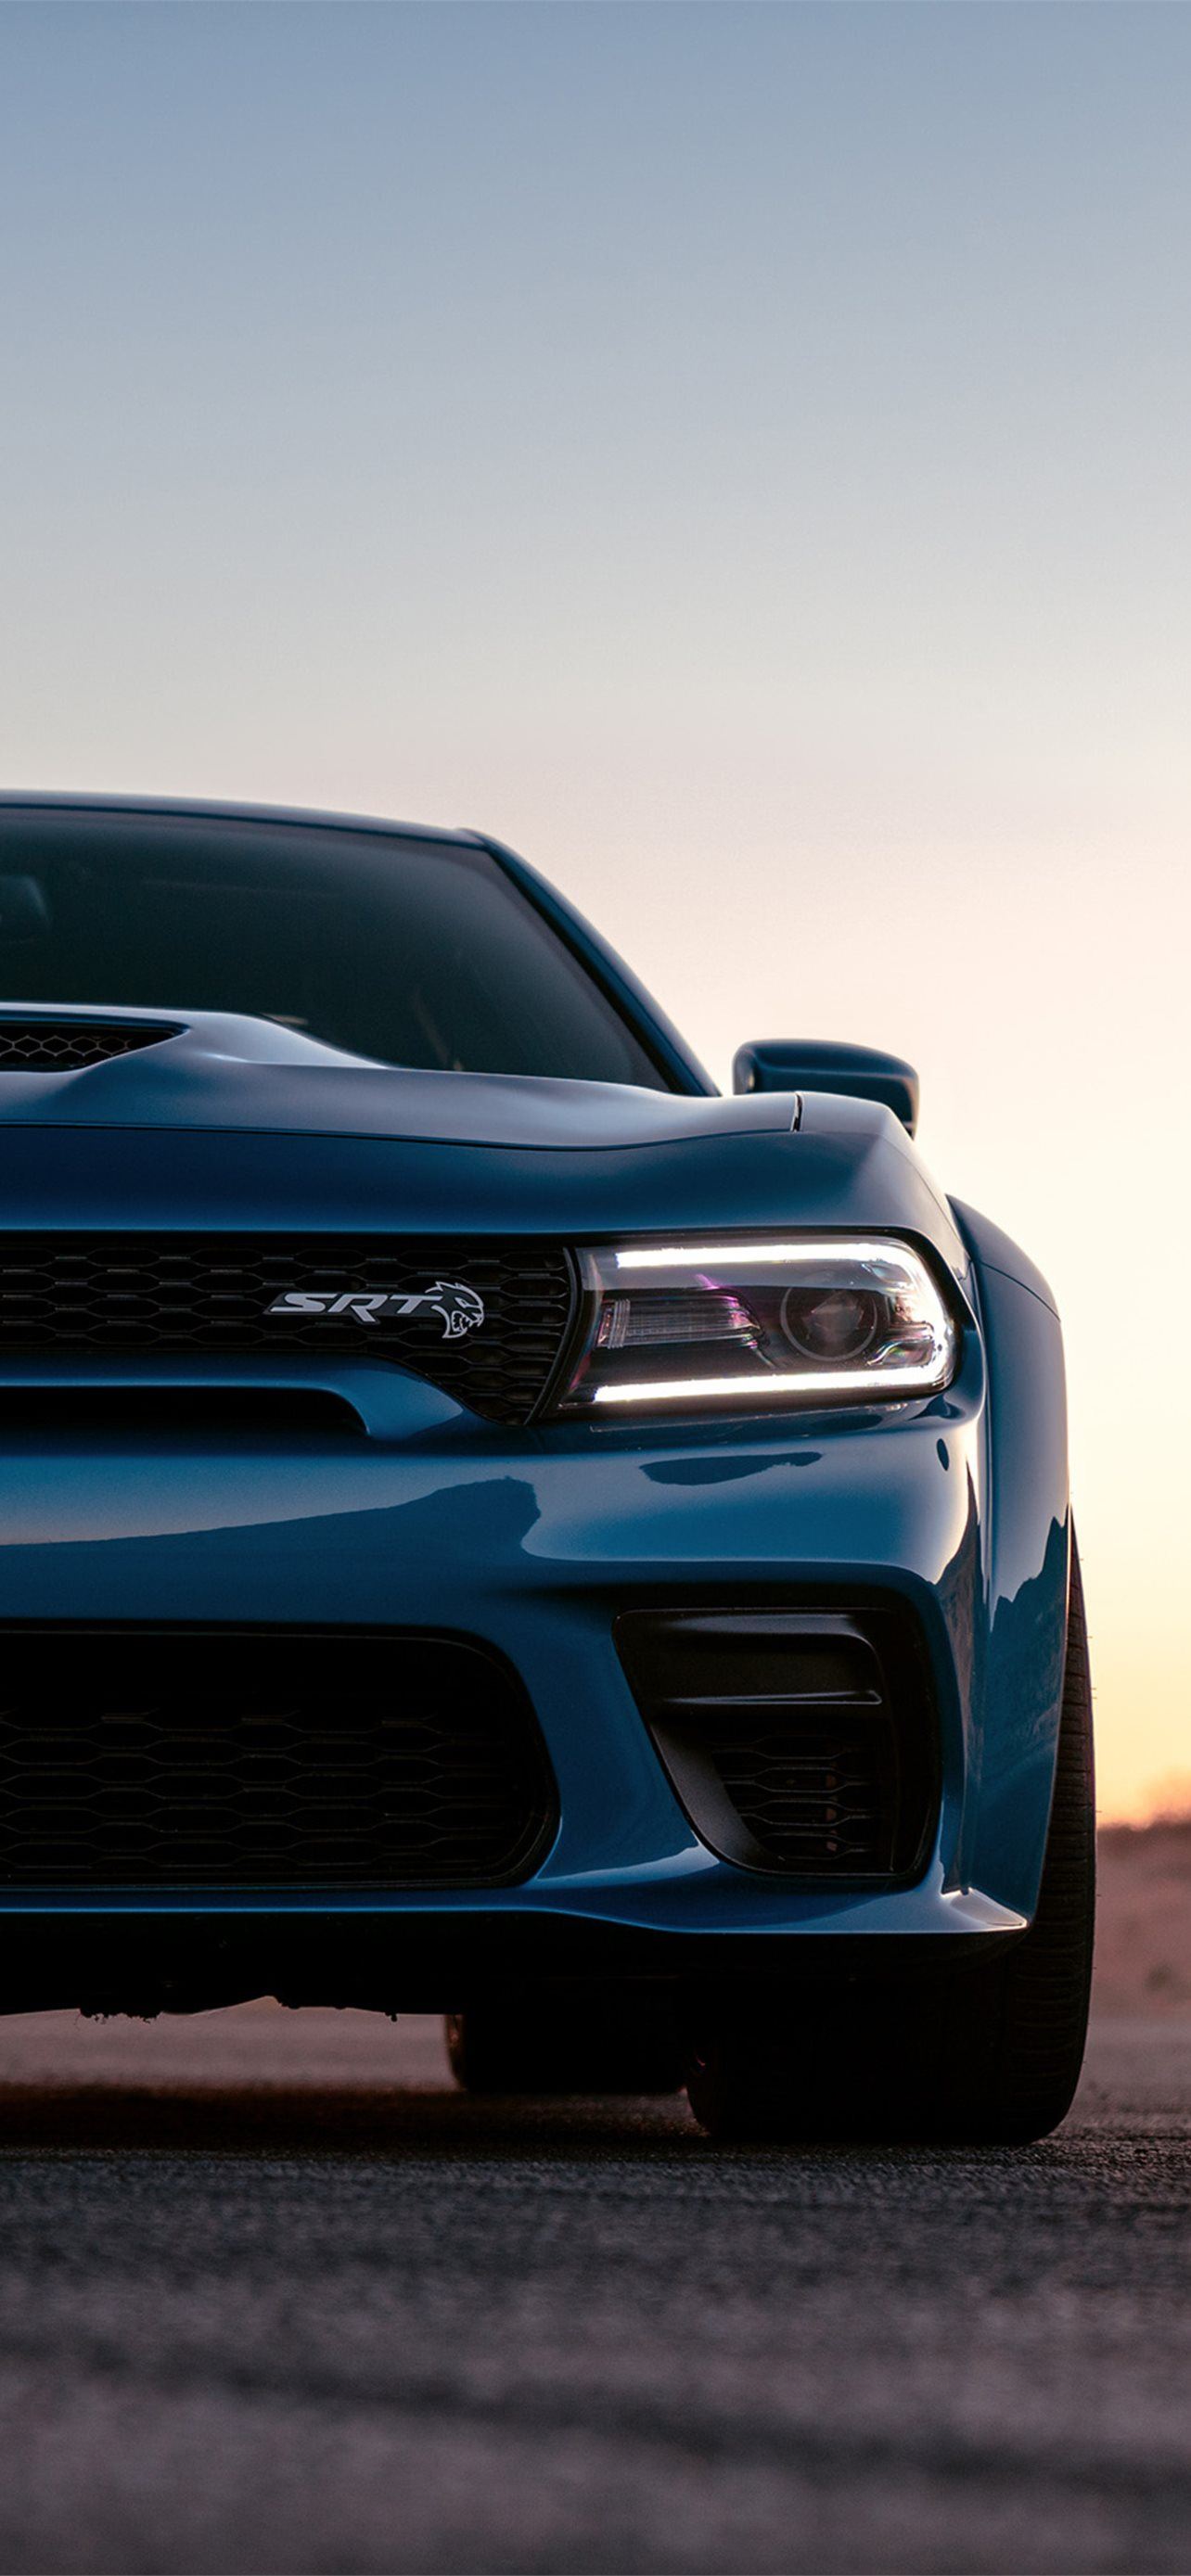 Dodge Charger Hellcat Iphone Wallpapers Free Download